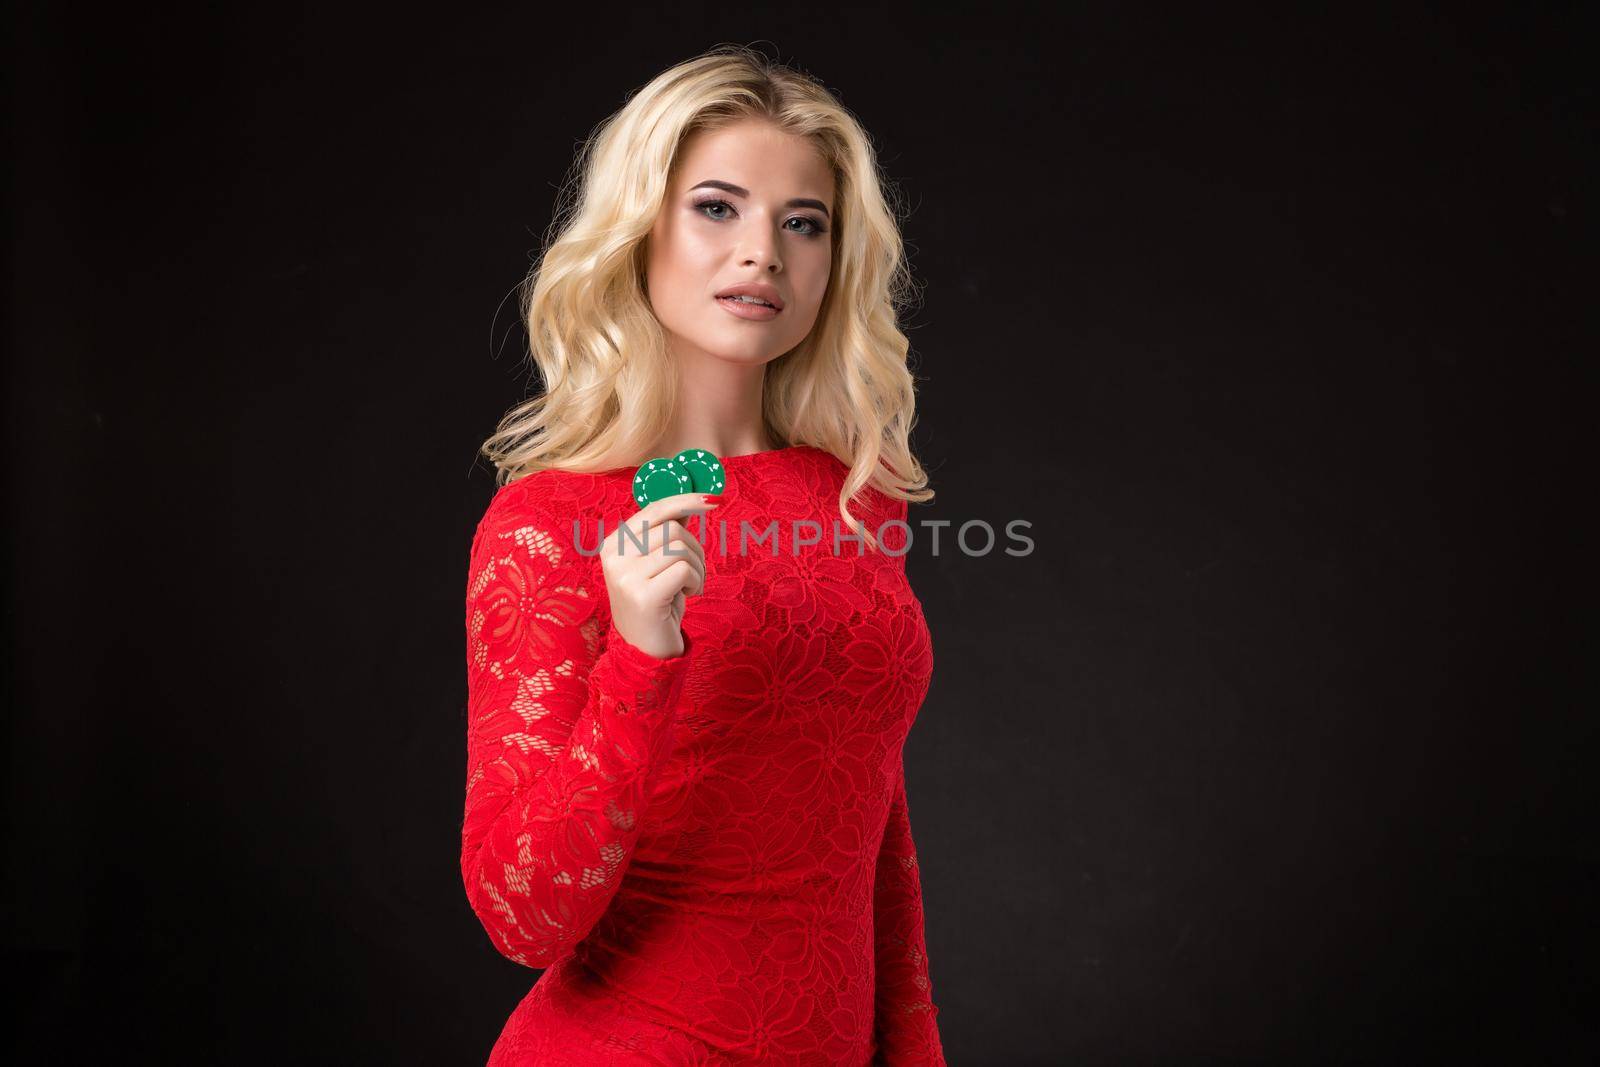 Young beautiful blond woman in a red dress with poker chips over black. Poker